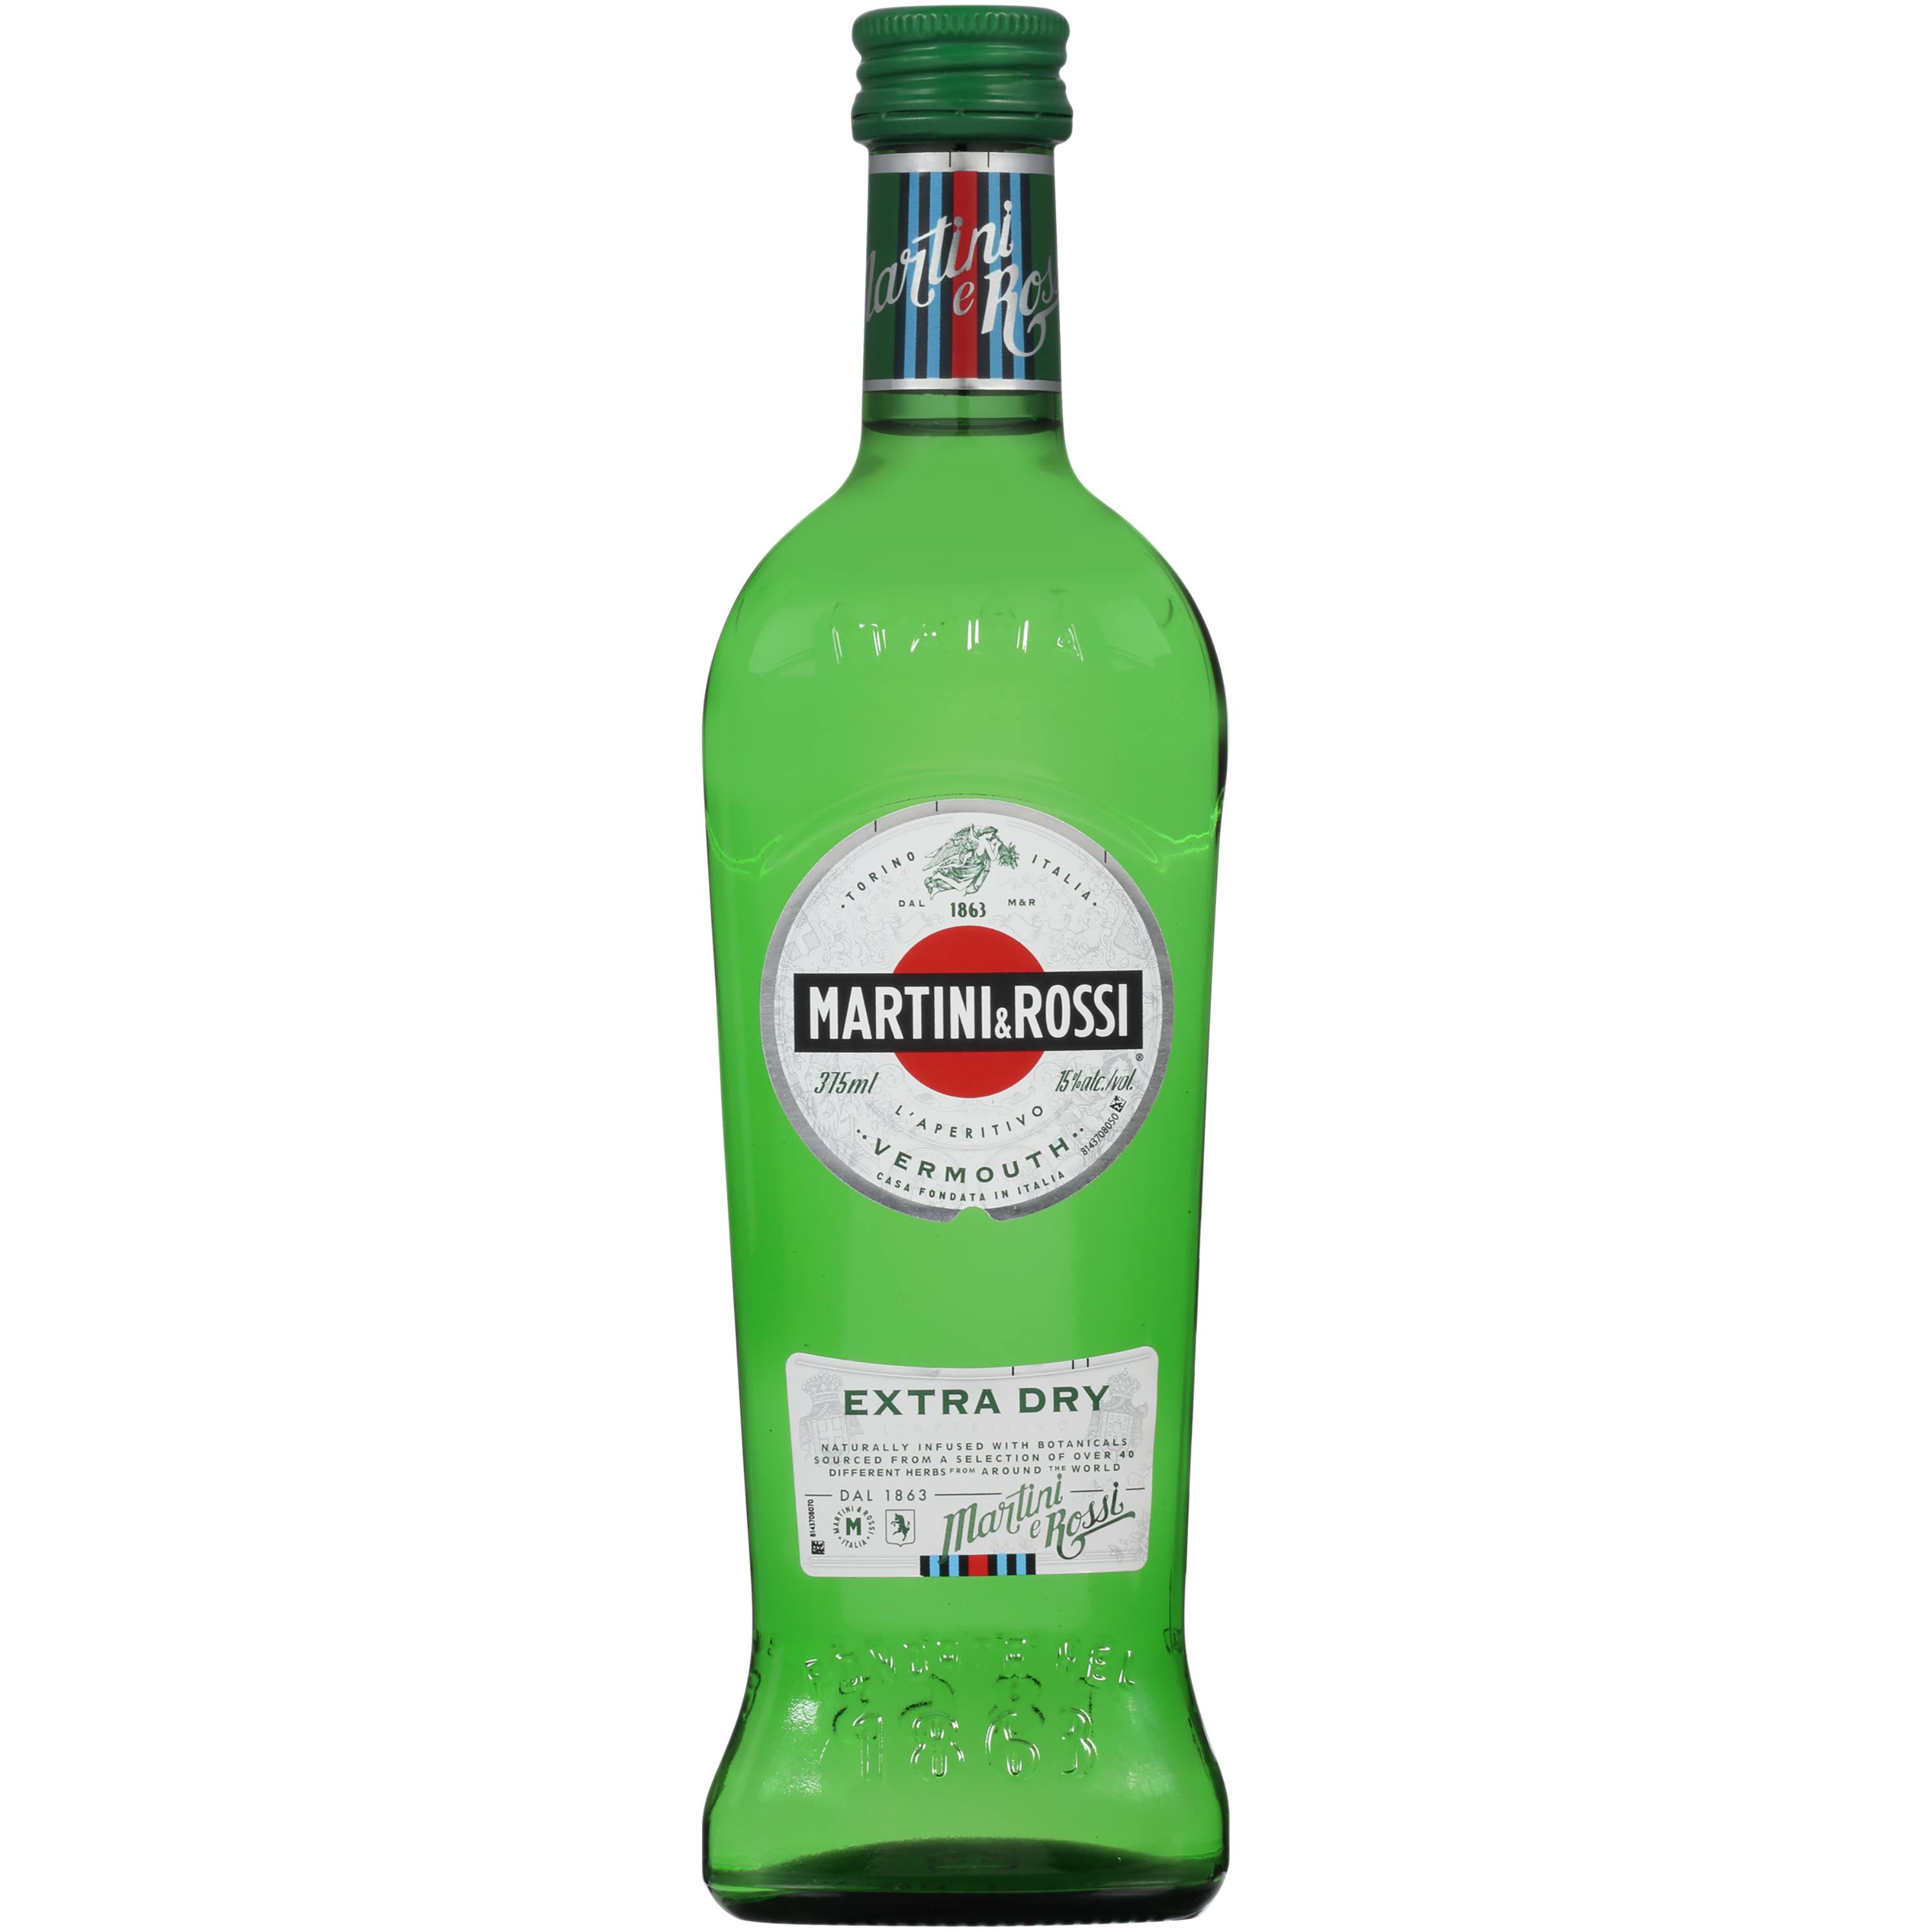 Martini & Rossi Extra Dry Vermouth 375ml Bottle